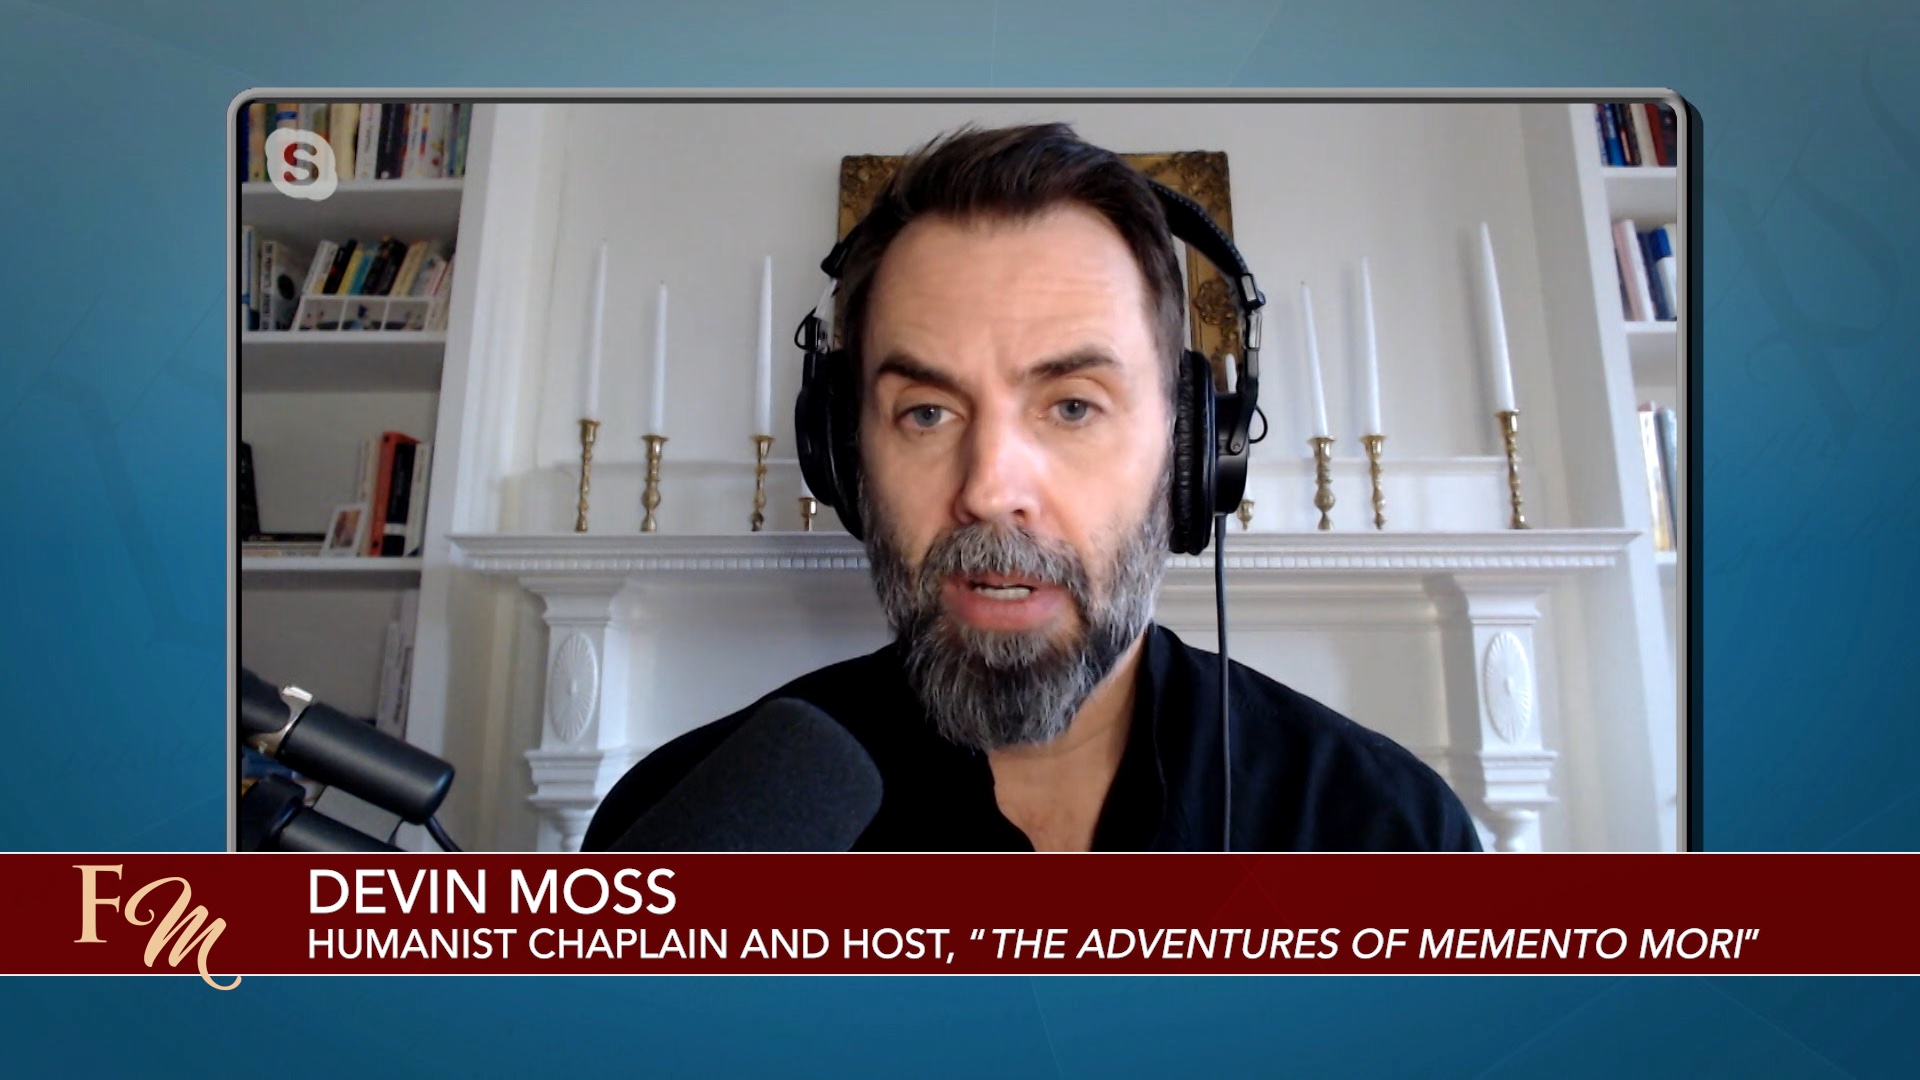 A screenshot of Devin Moss, humanist chaplain, during his interview with Freethought Matters